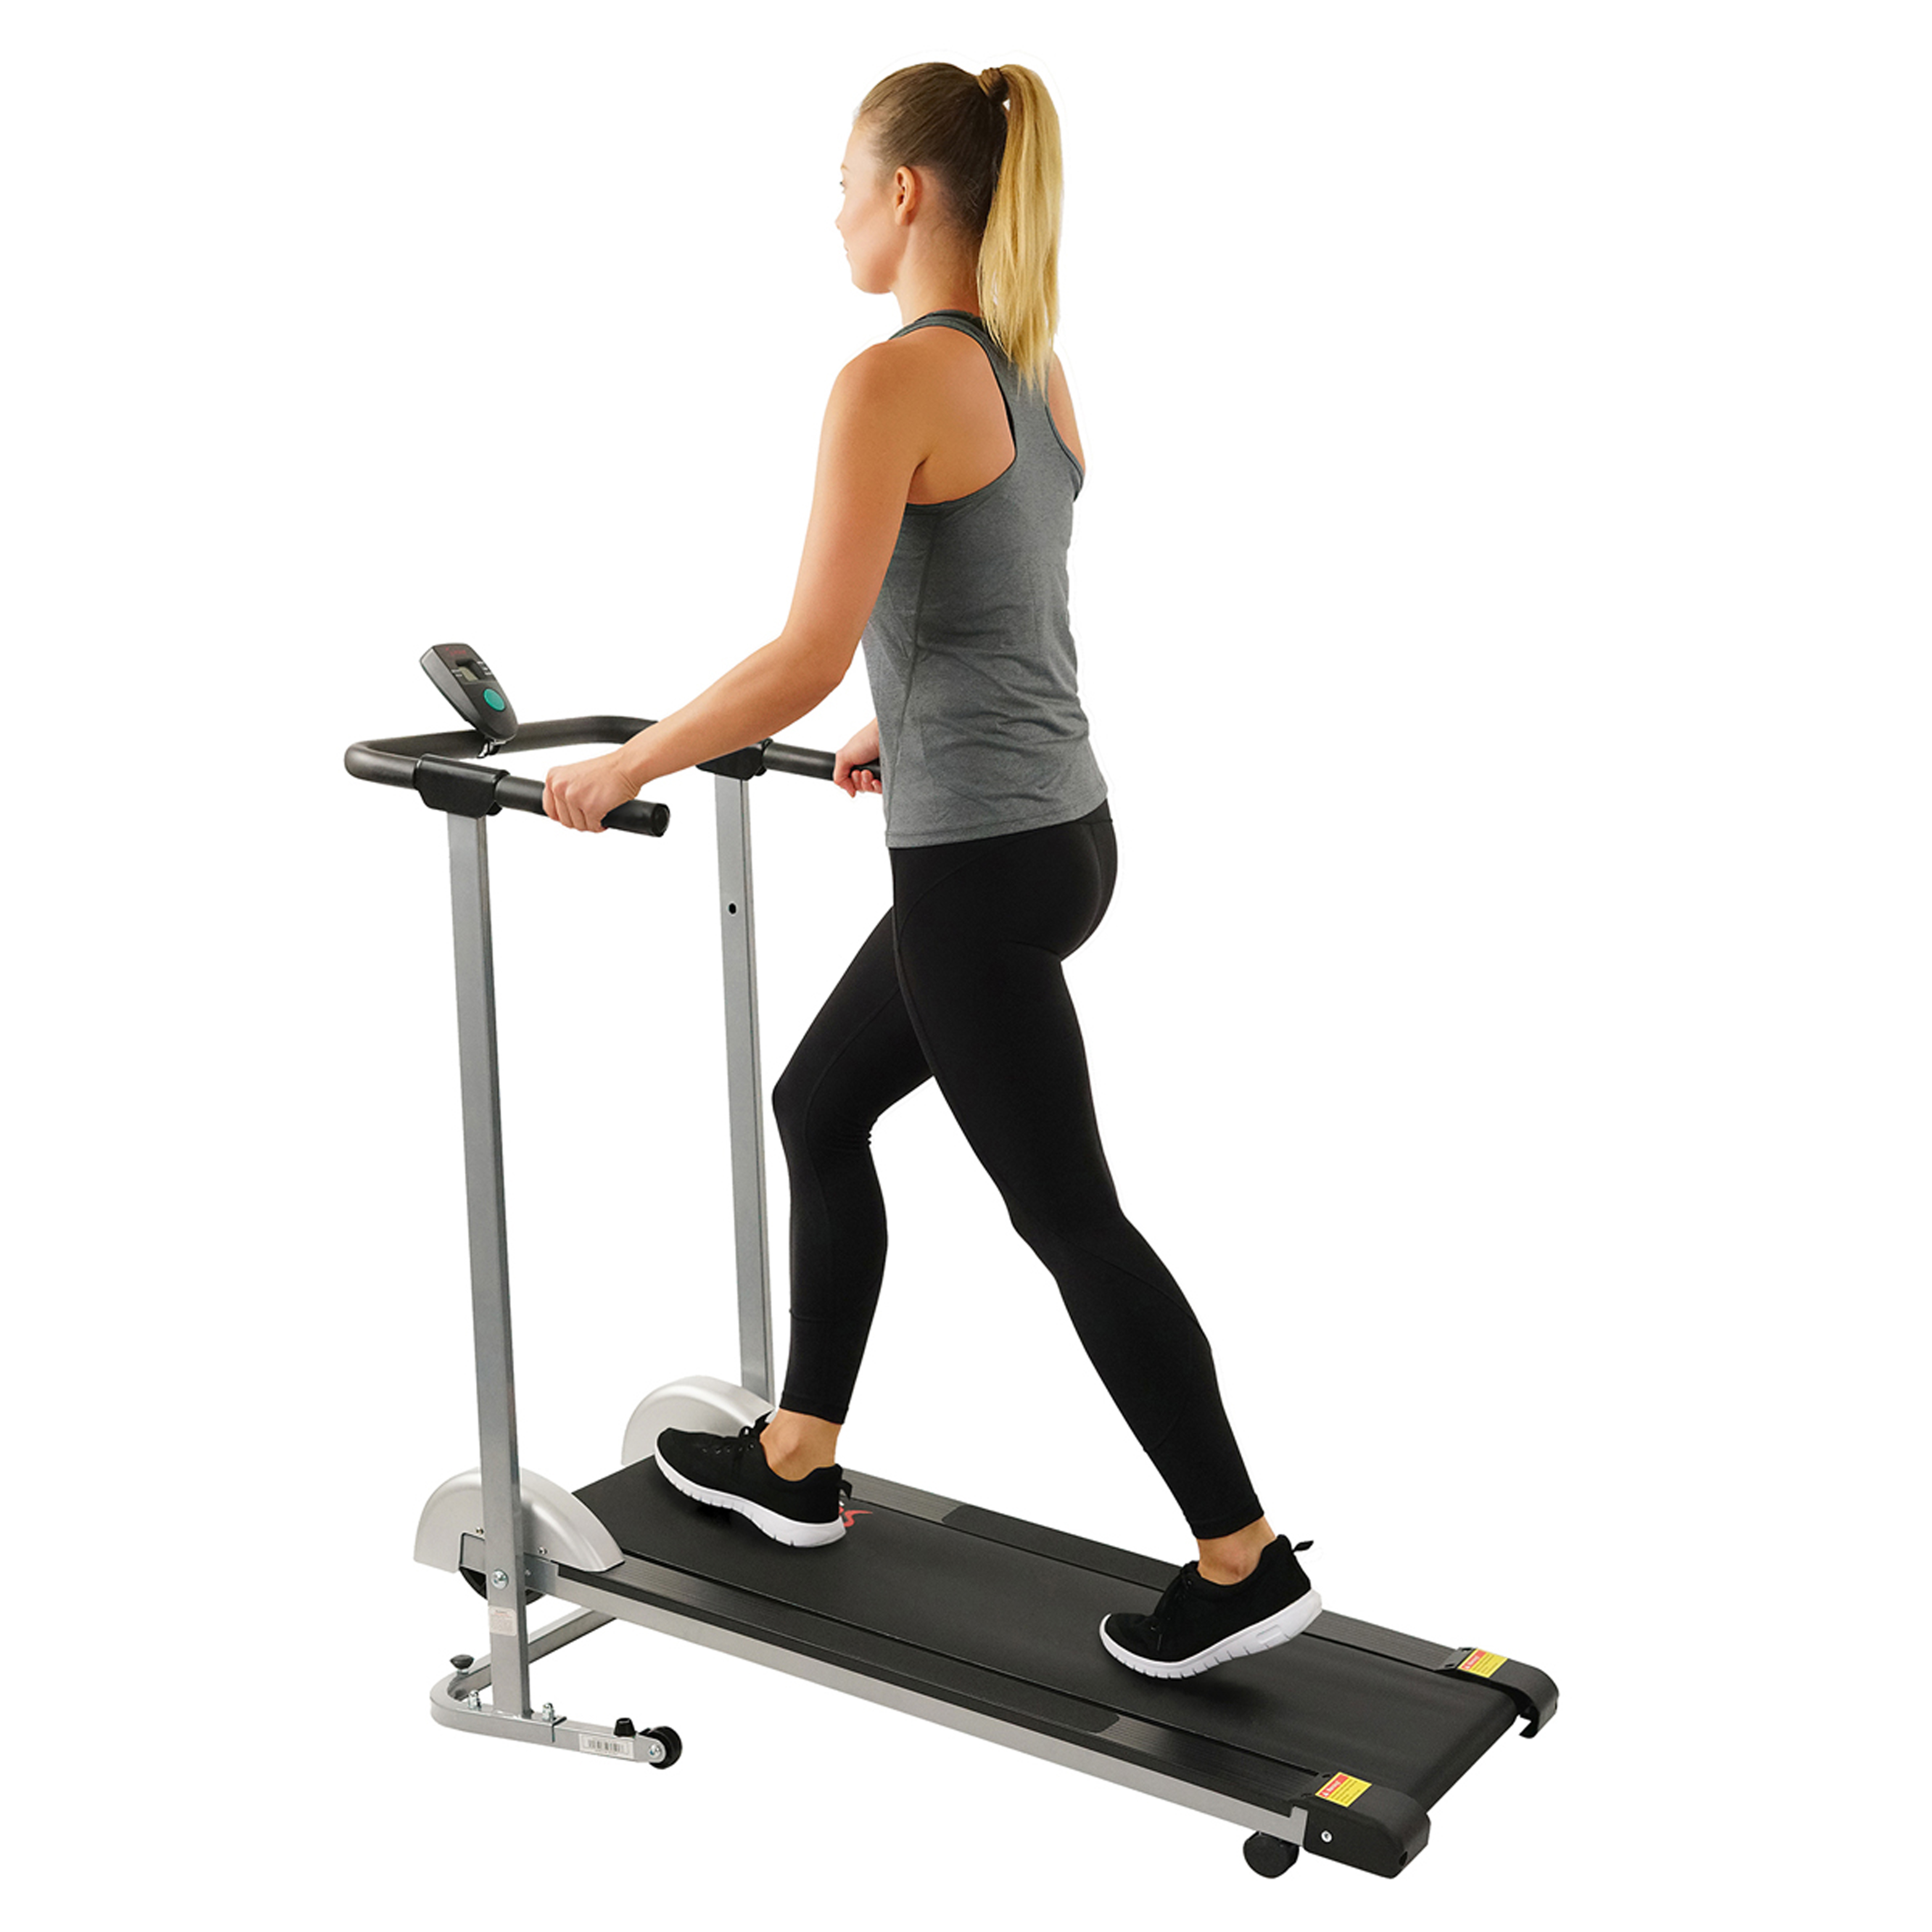 Sunny Health & Fitness Manual Treadmill - Compact Foldable Exercise Machine for Running and Cardio Training, SF-T1407M - image 5 of 8